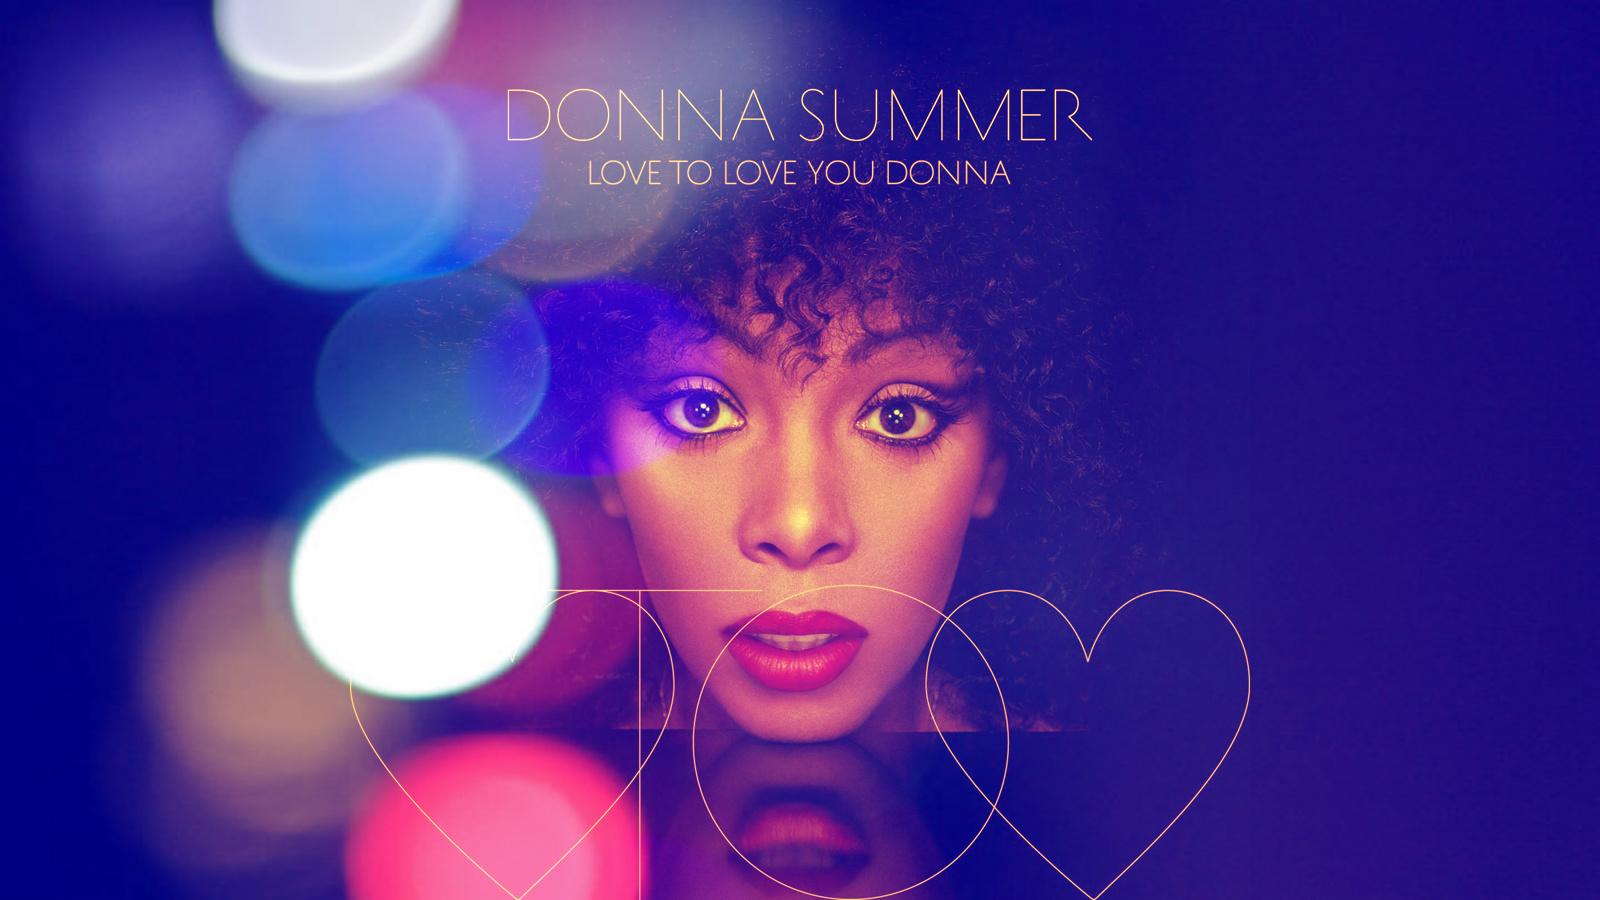 images of donna summer